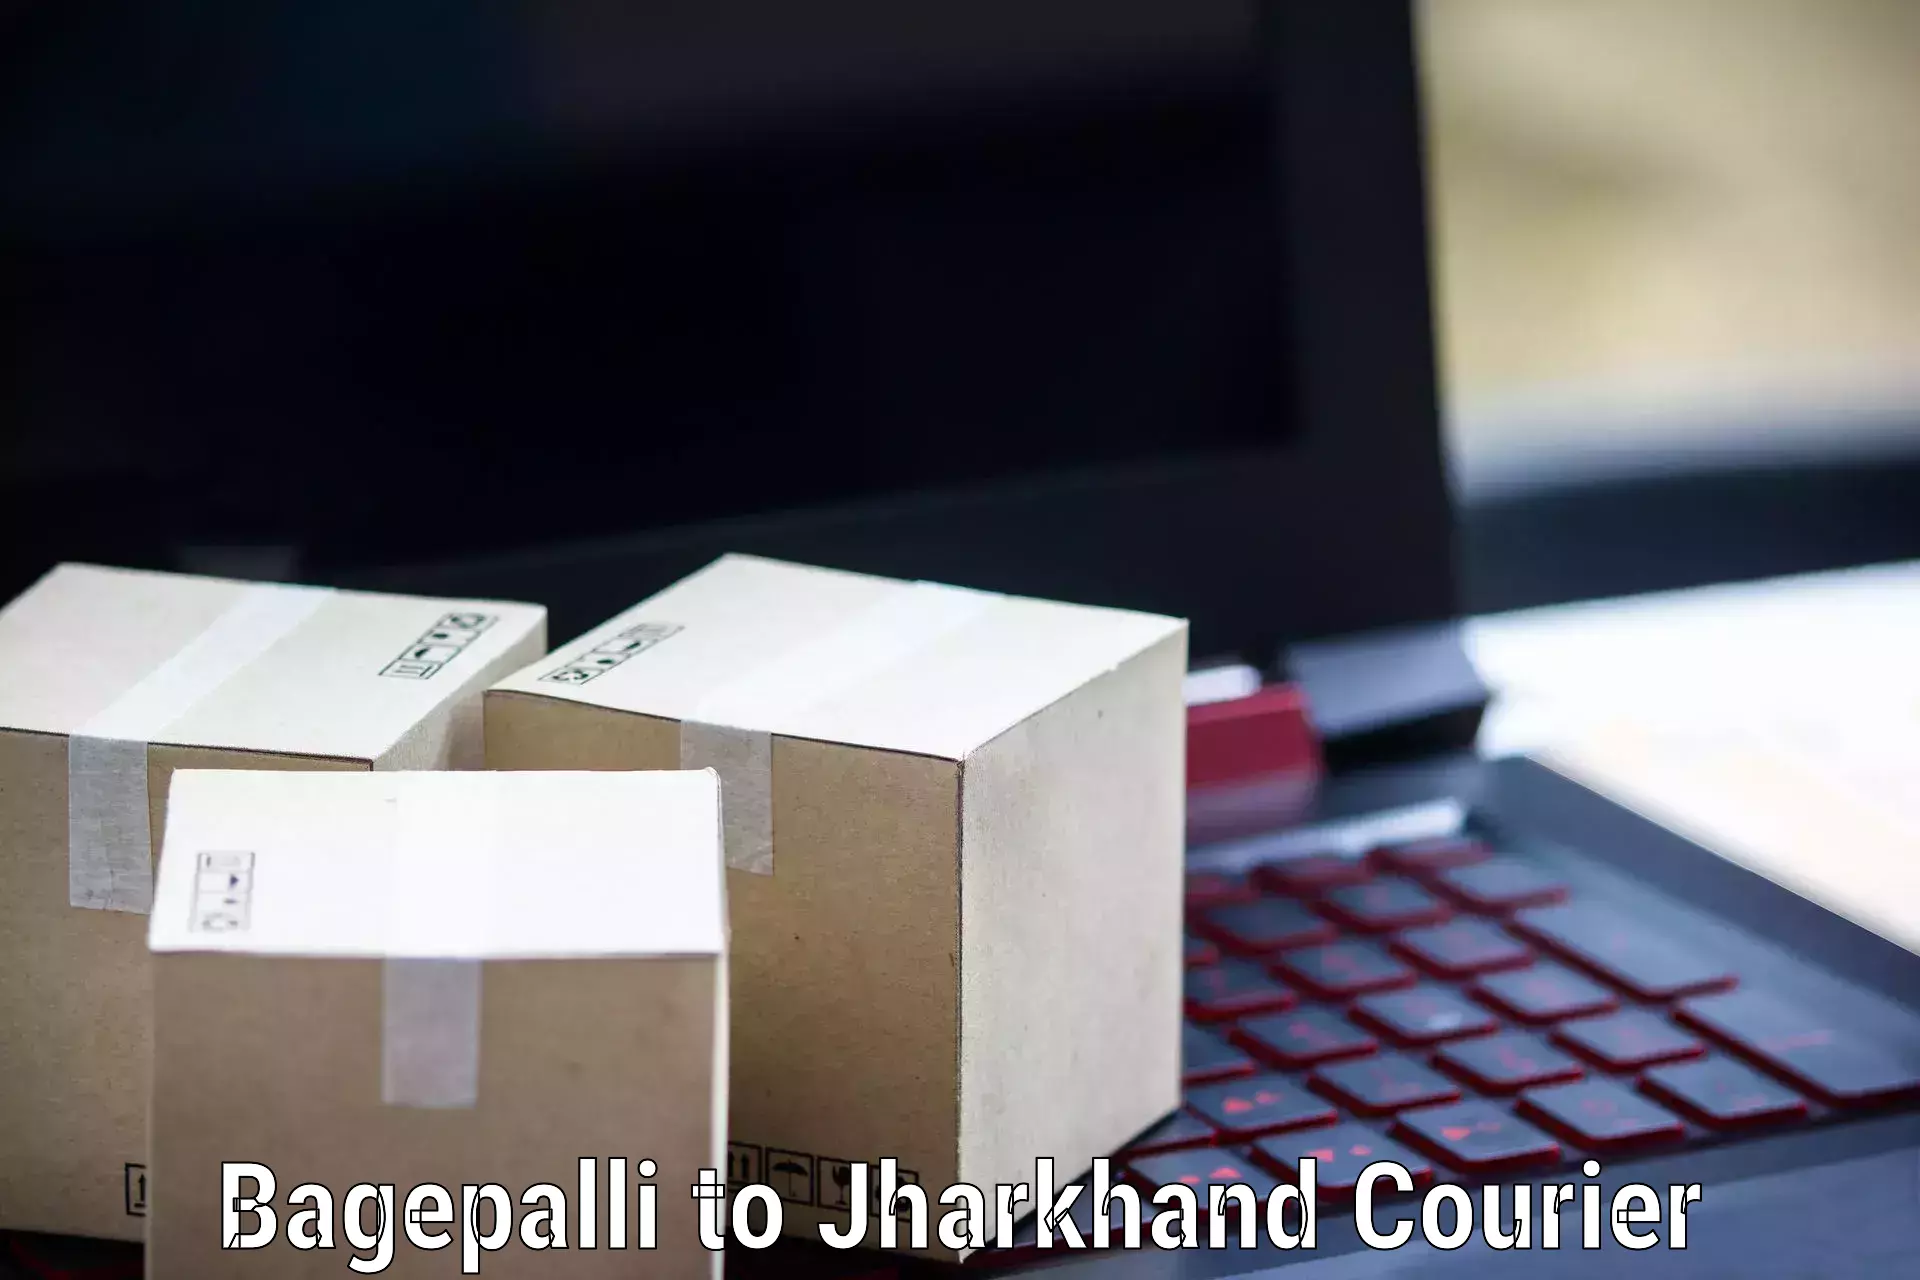 Local delivery service Bagepalli to Ranchi